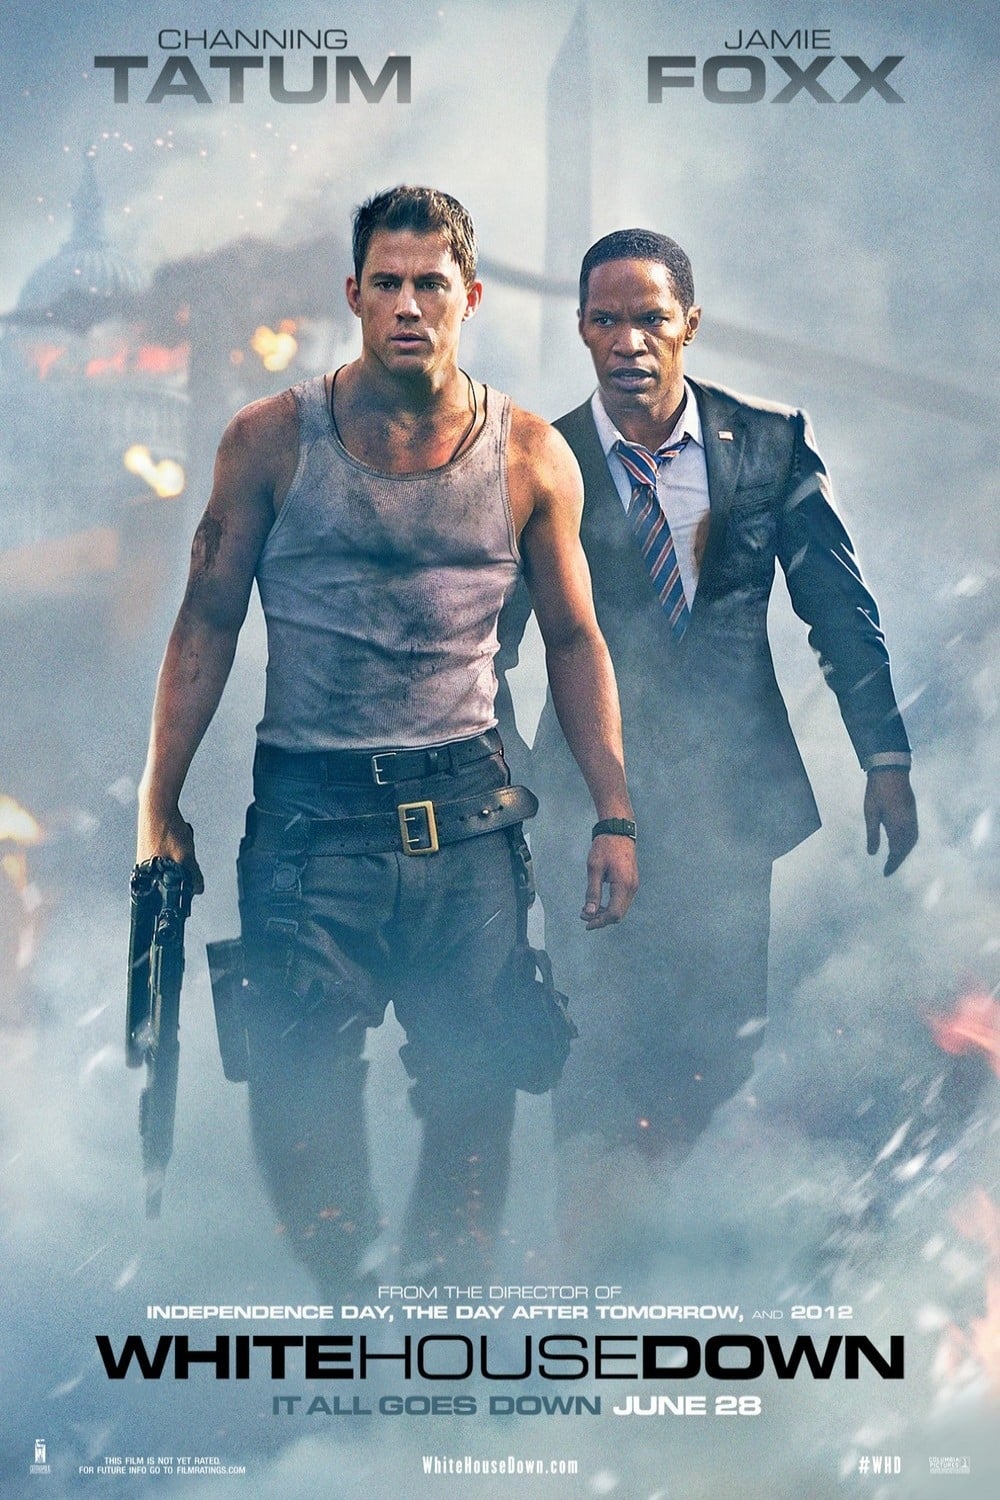 Meet the Insiders of White House Down